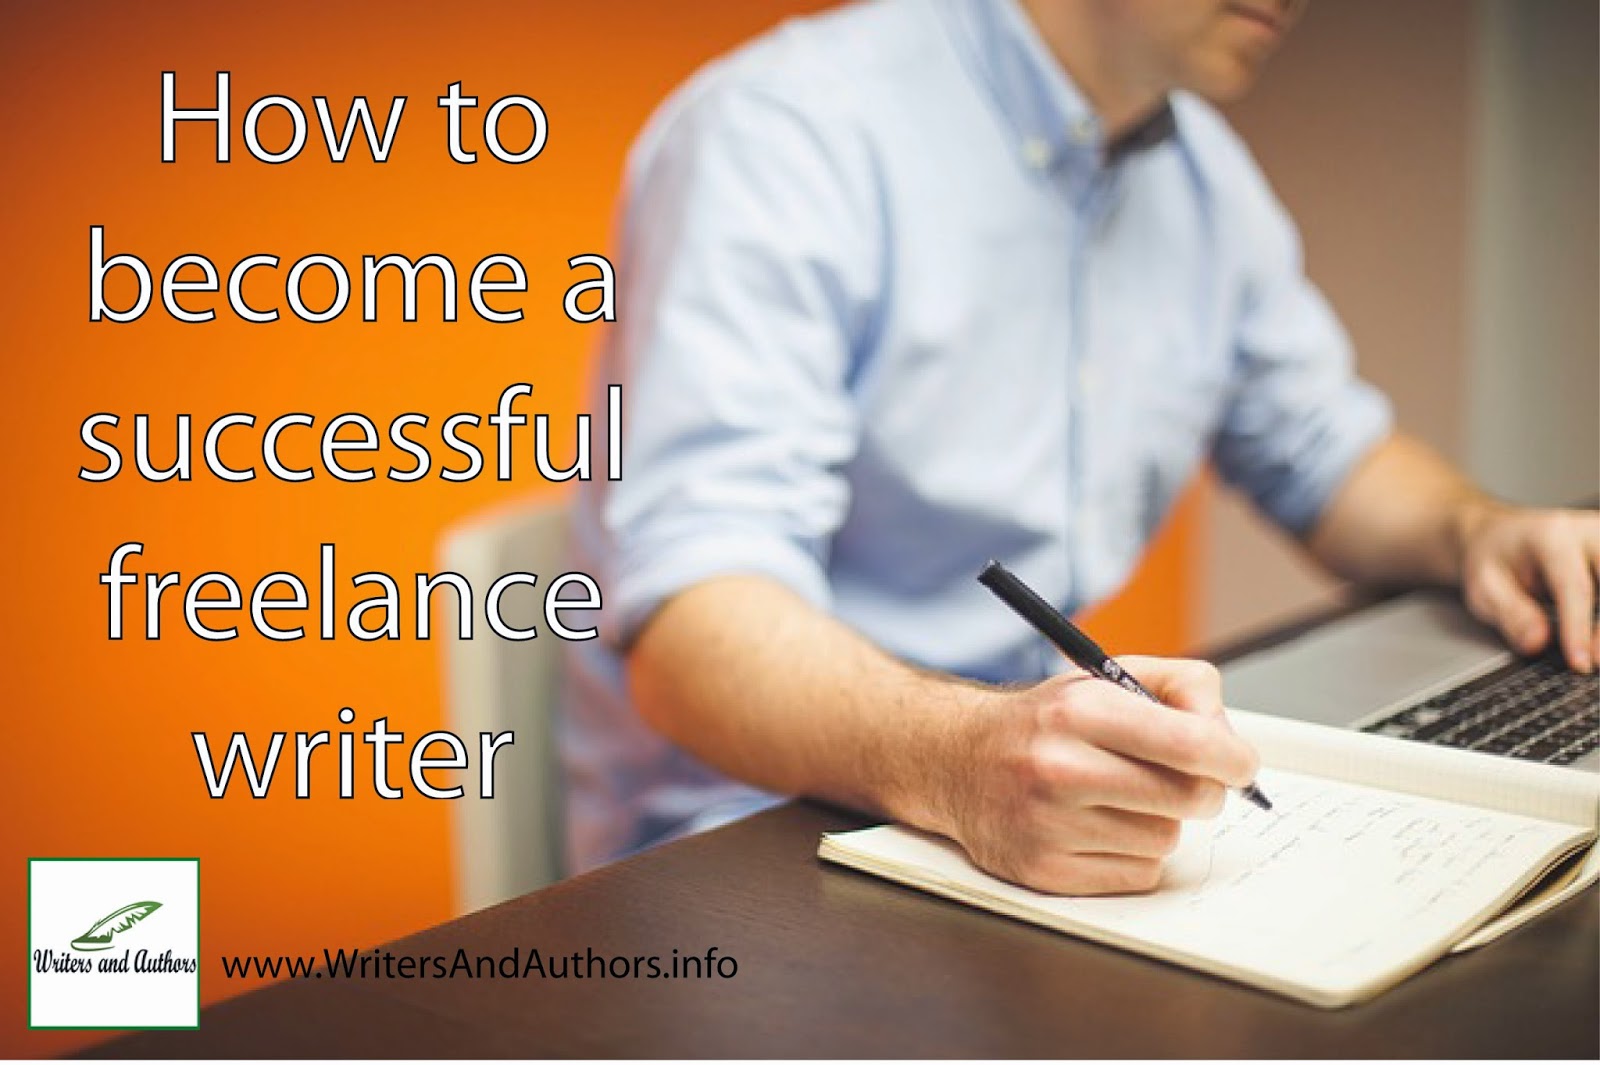 How to become a successful freelance writer, www.WritersAndAuthors.info